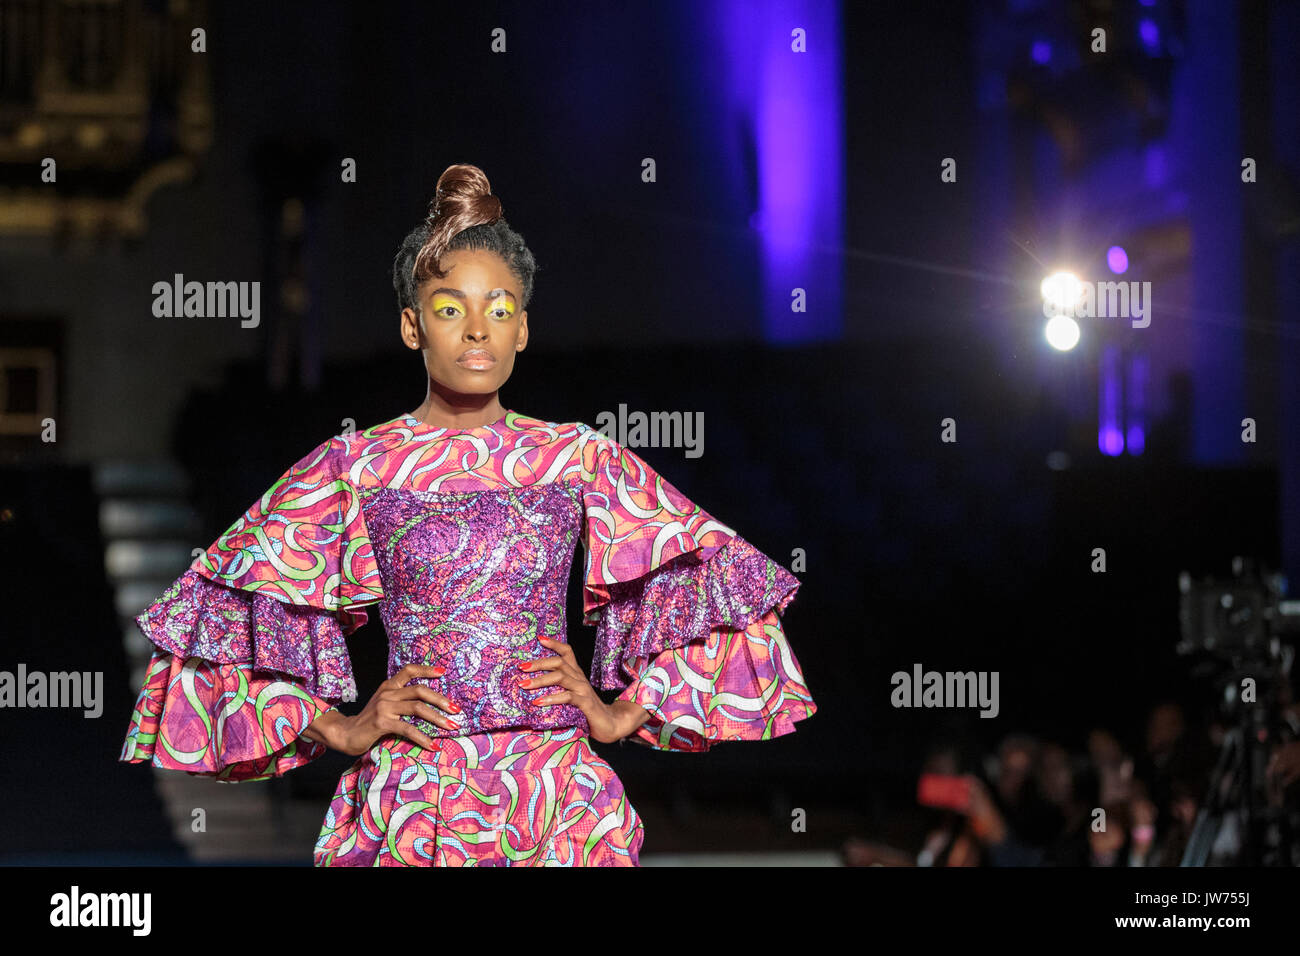 London, UK, 11th August 2017. The Bijelly designs are presented. Models on the second runway of the day, with designs by Godwin Green, Araewa, Bijelly, Regallia, Maufechi, Monami 4 Moremi, Kola Kuddus. Since debuting in 2011, the two day Africa Fashion Week London, AFWL, has grown into one of the largest Africa inspired fashion events in Europe. Stock Photo